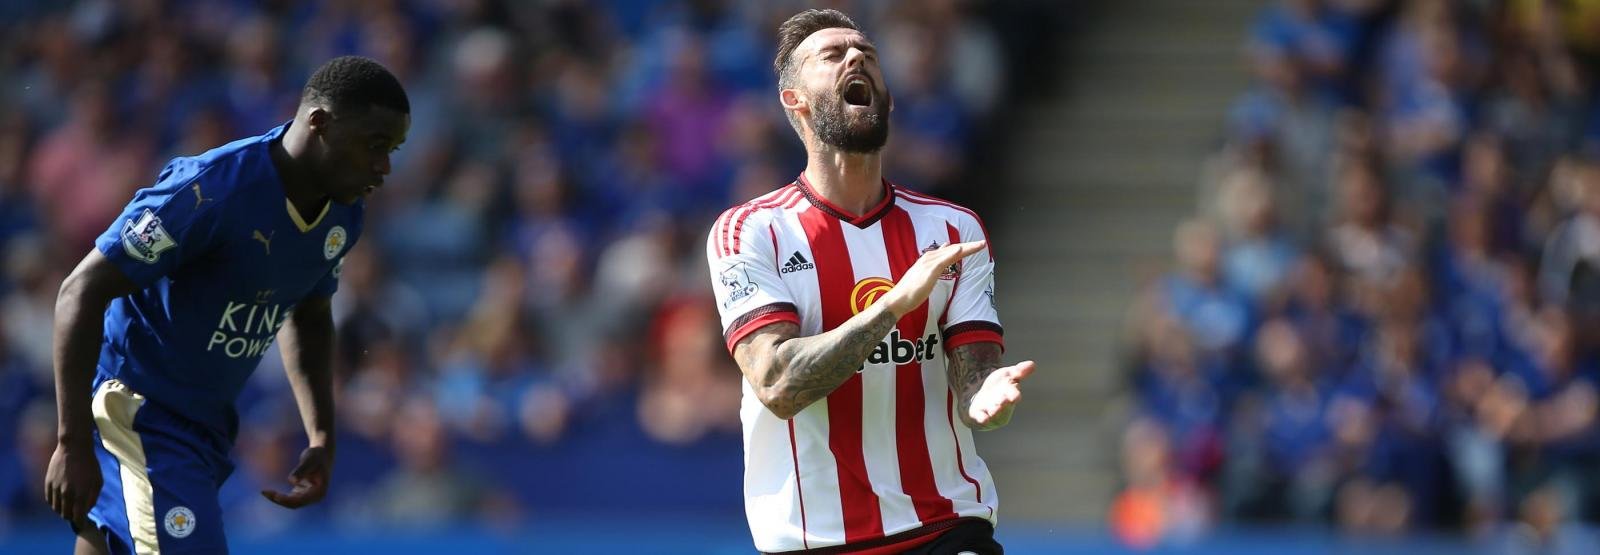 Lack of quality proving to be Sunderland’s downfall